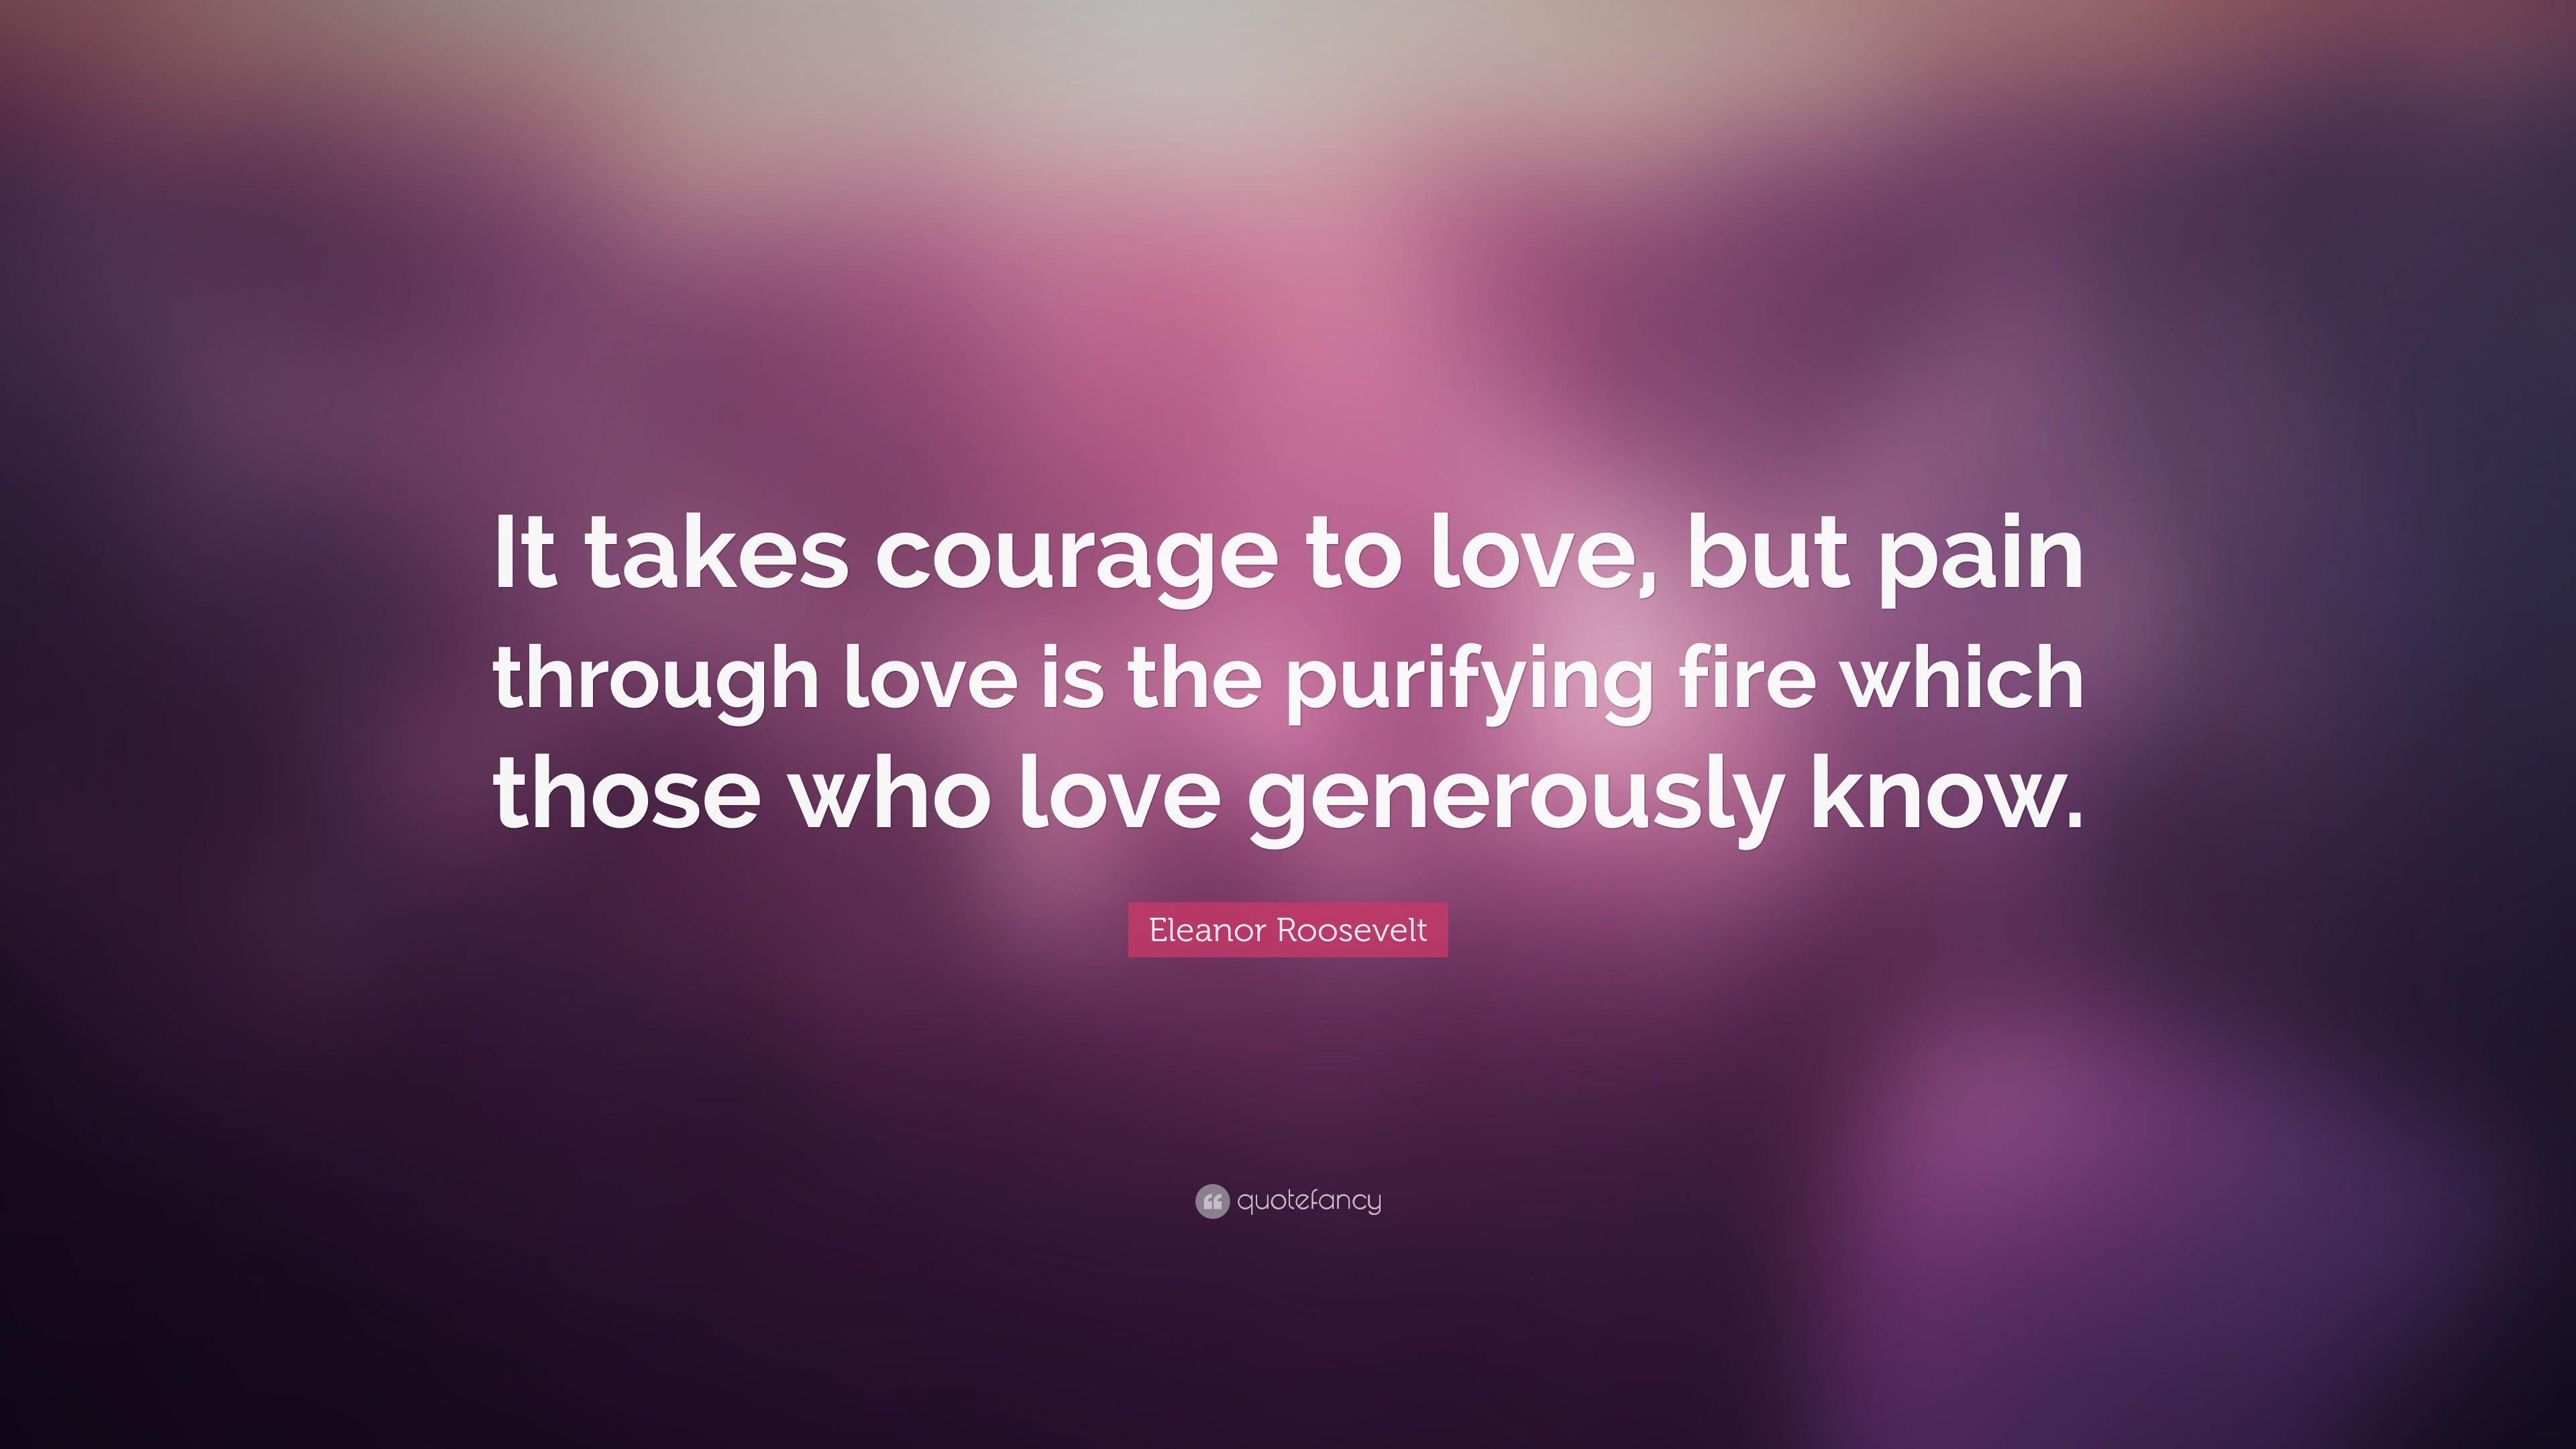 Eleanor Roosevelt Quote “It takes courage to love but pain through love is